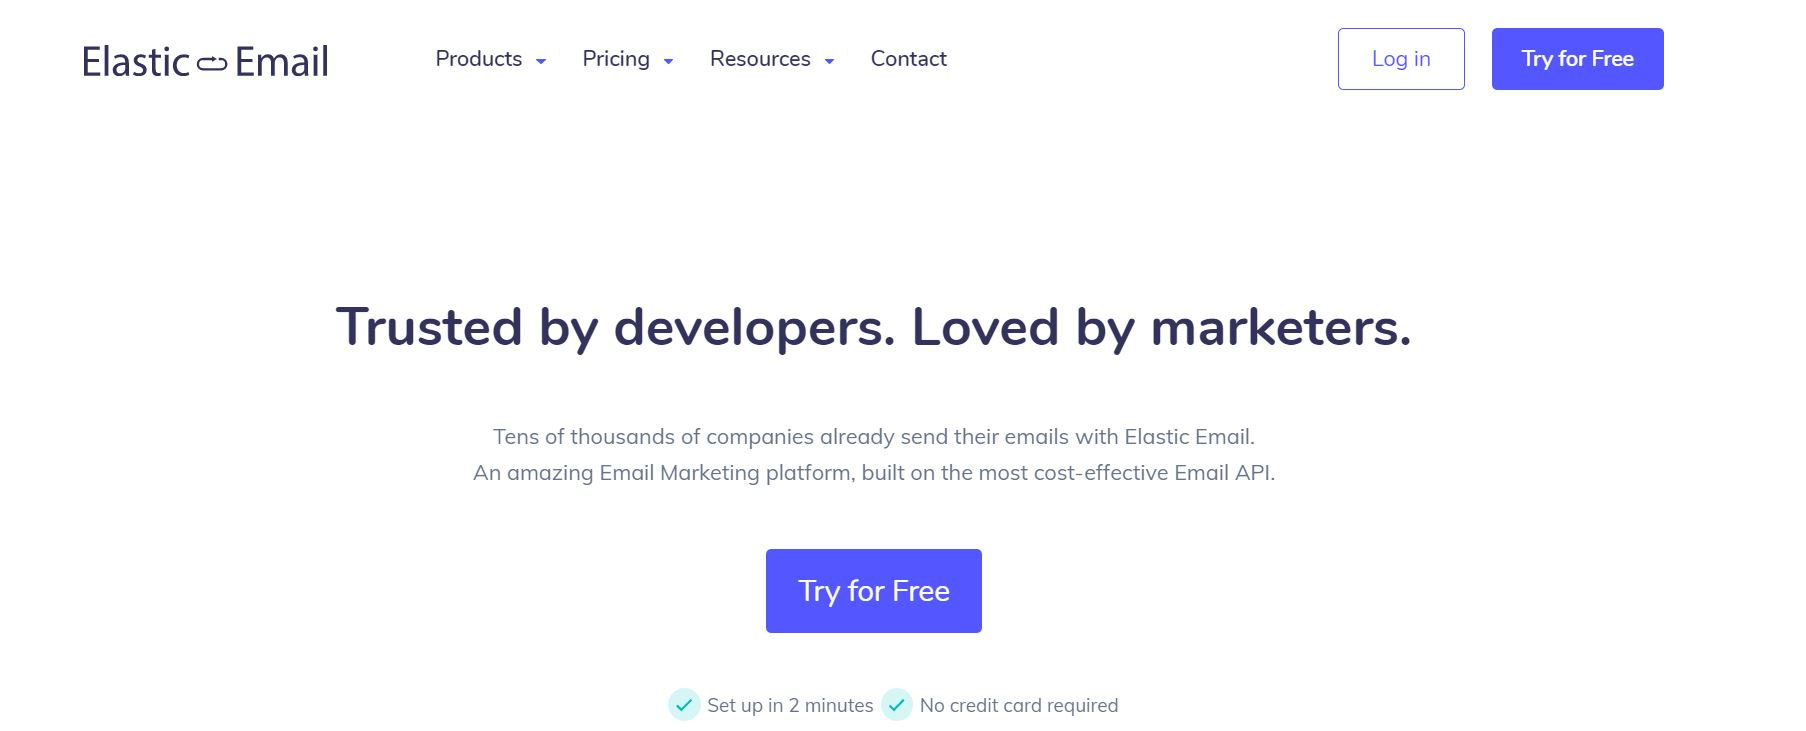 The Elastic Email homepage.